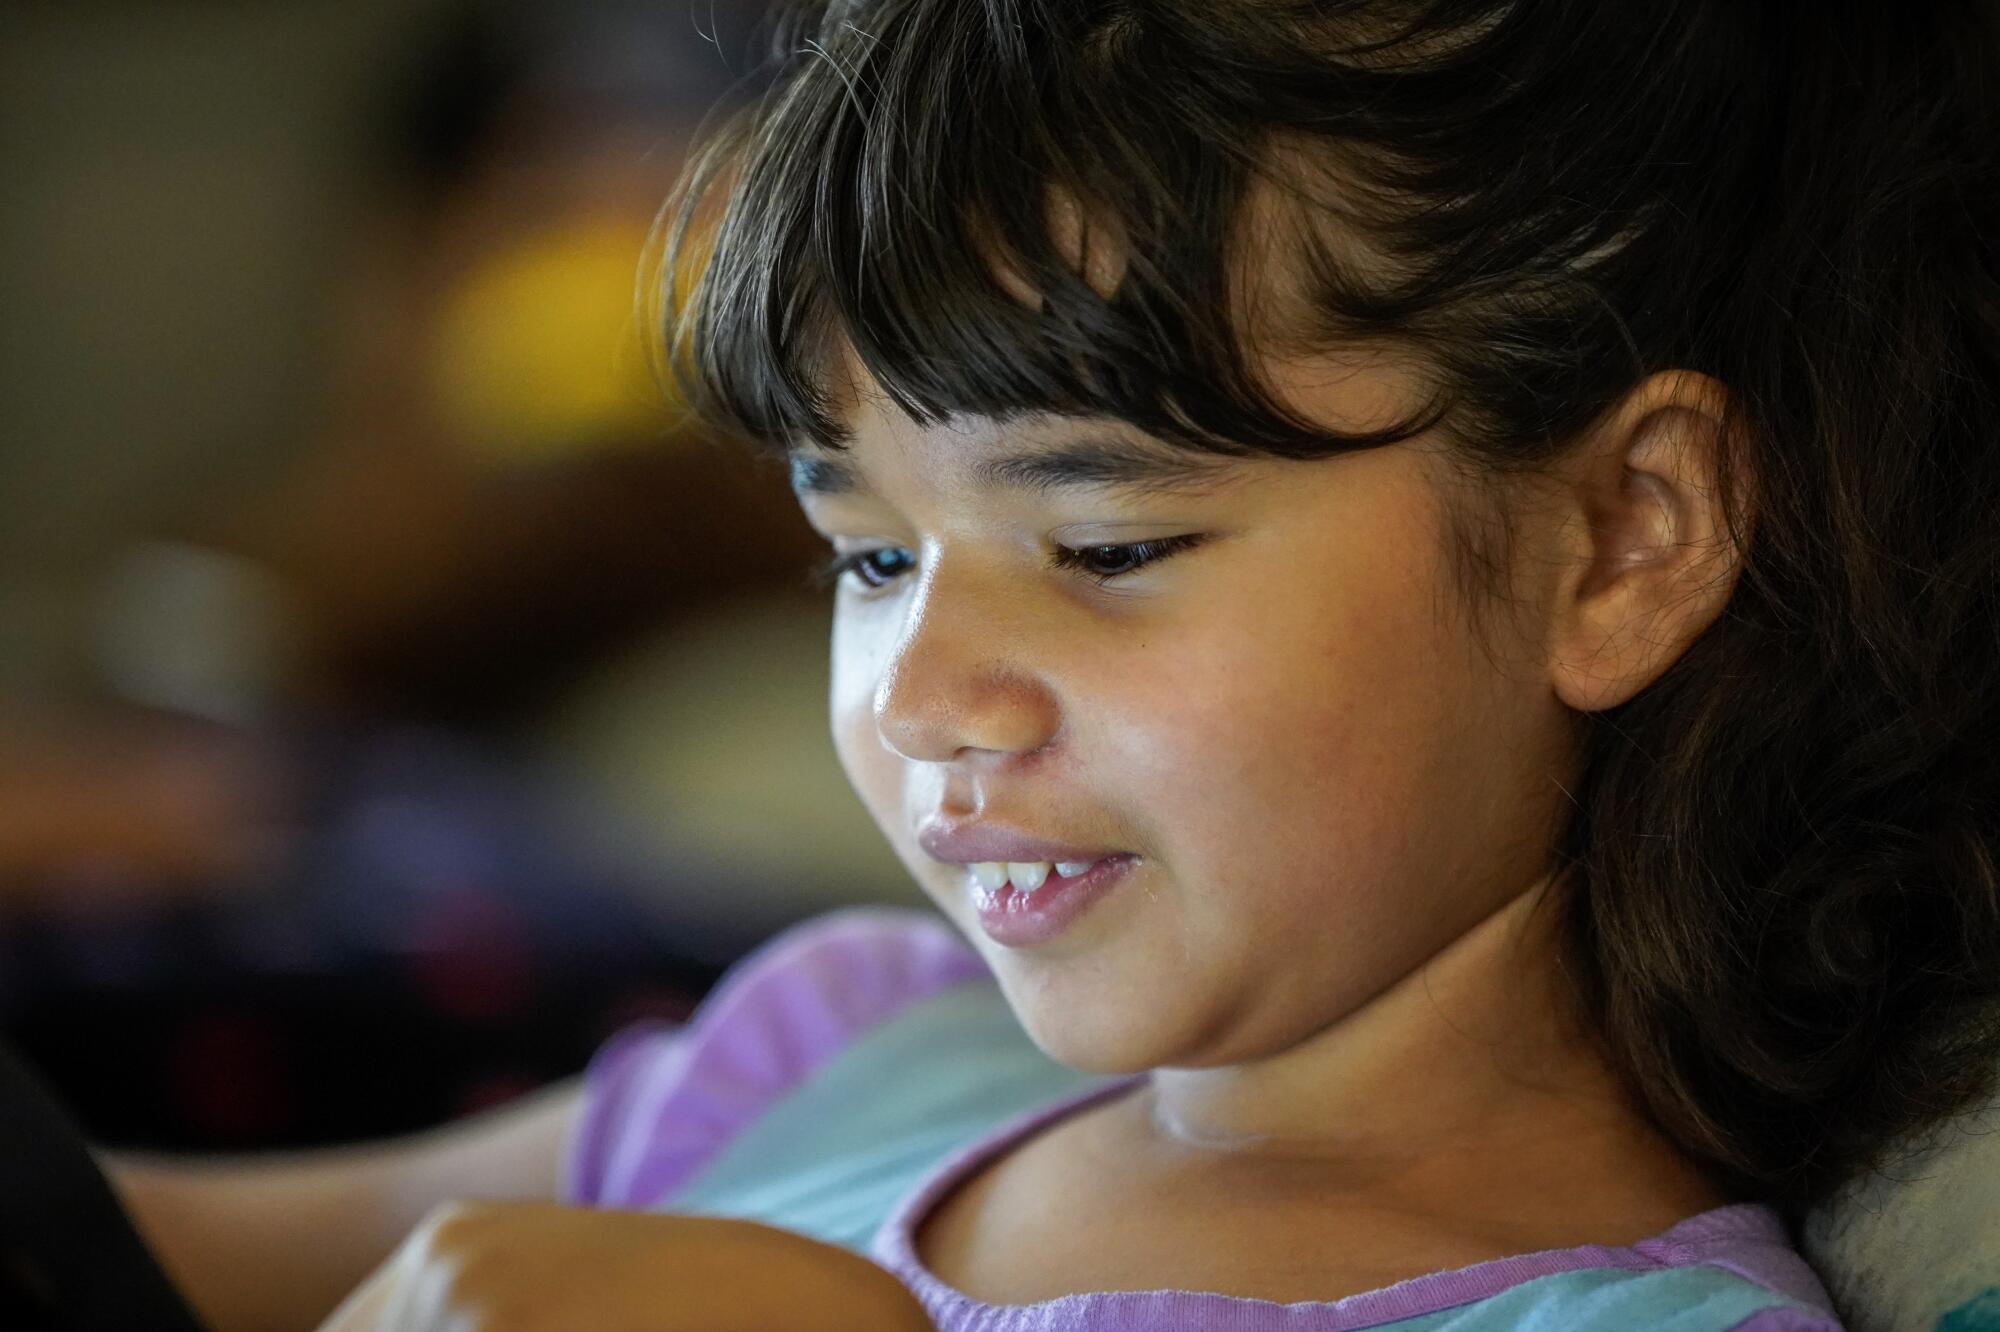 The smiling face of a girl playing on her tablet.